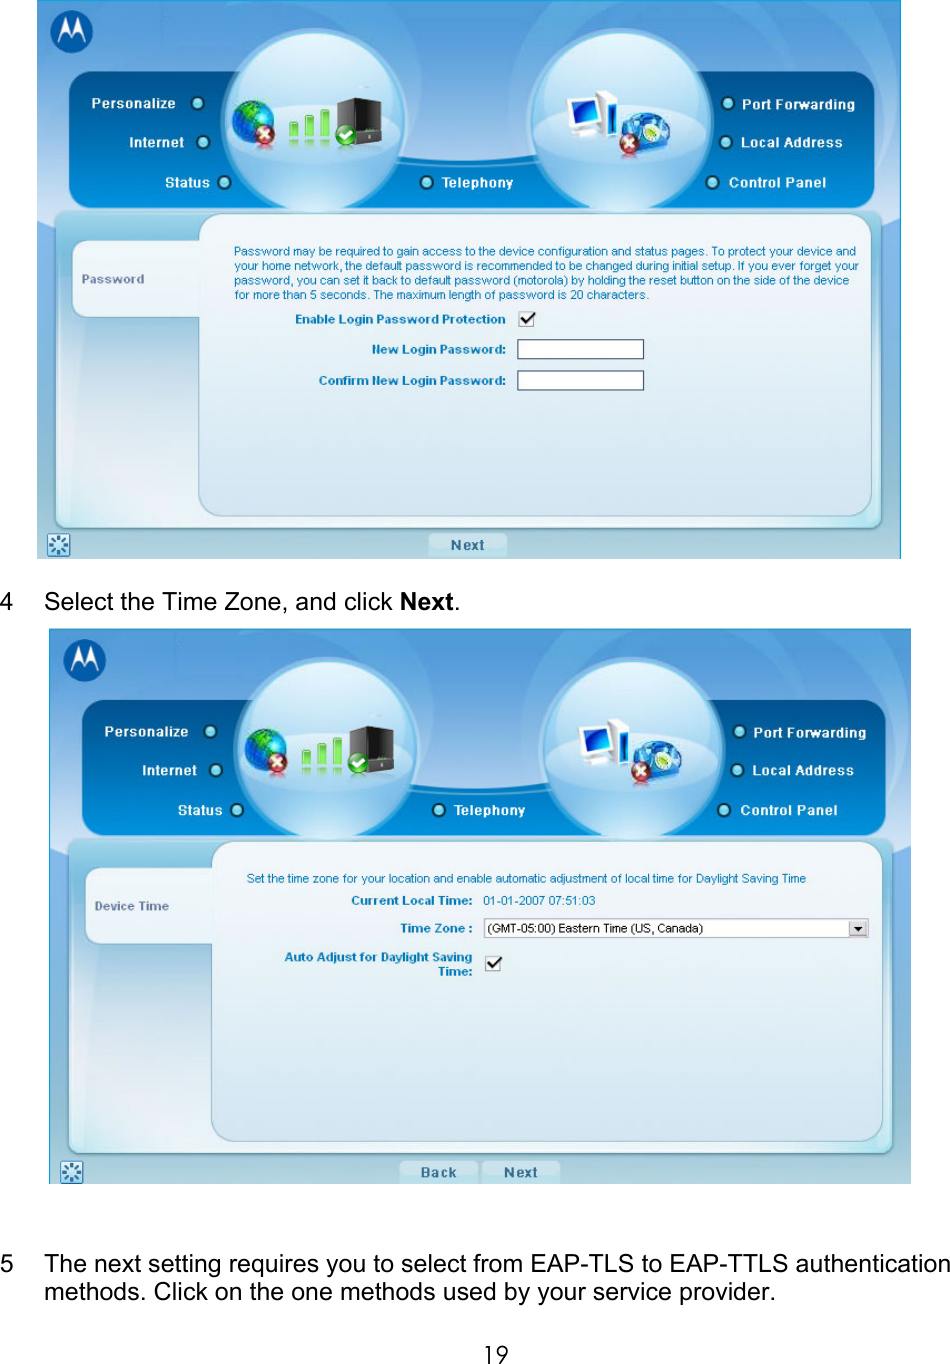     19  4  Select the Time Zone, and click Next.    5  The next setting requires you to select from EAP-TLS to EAP-TTLS authentication methods. Click on the one methods used by your service provider. 